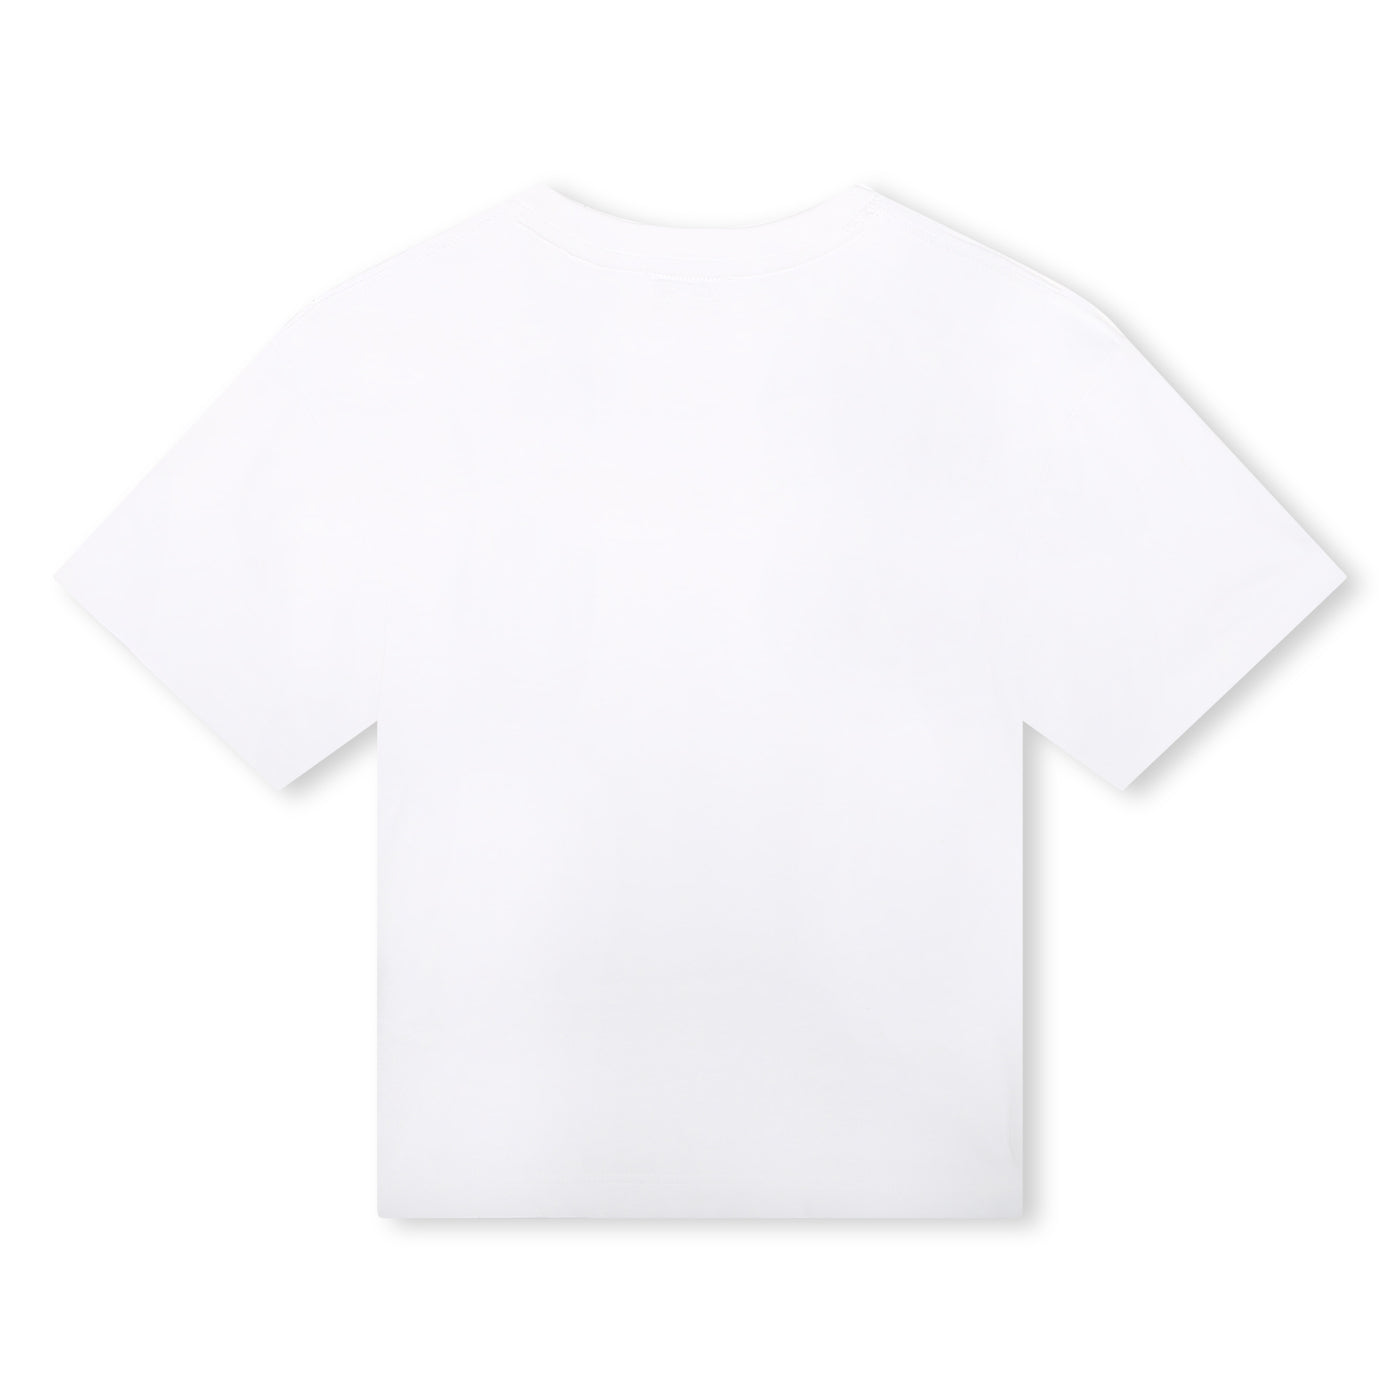 White T-shirt by Marc Jacobs